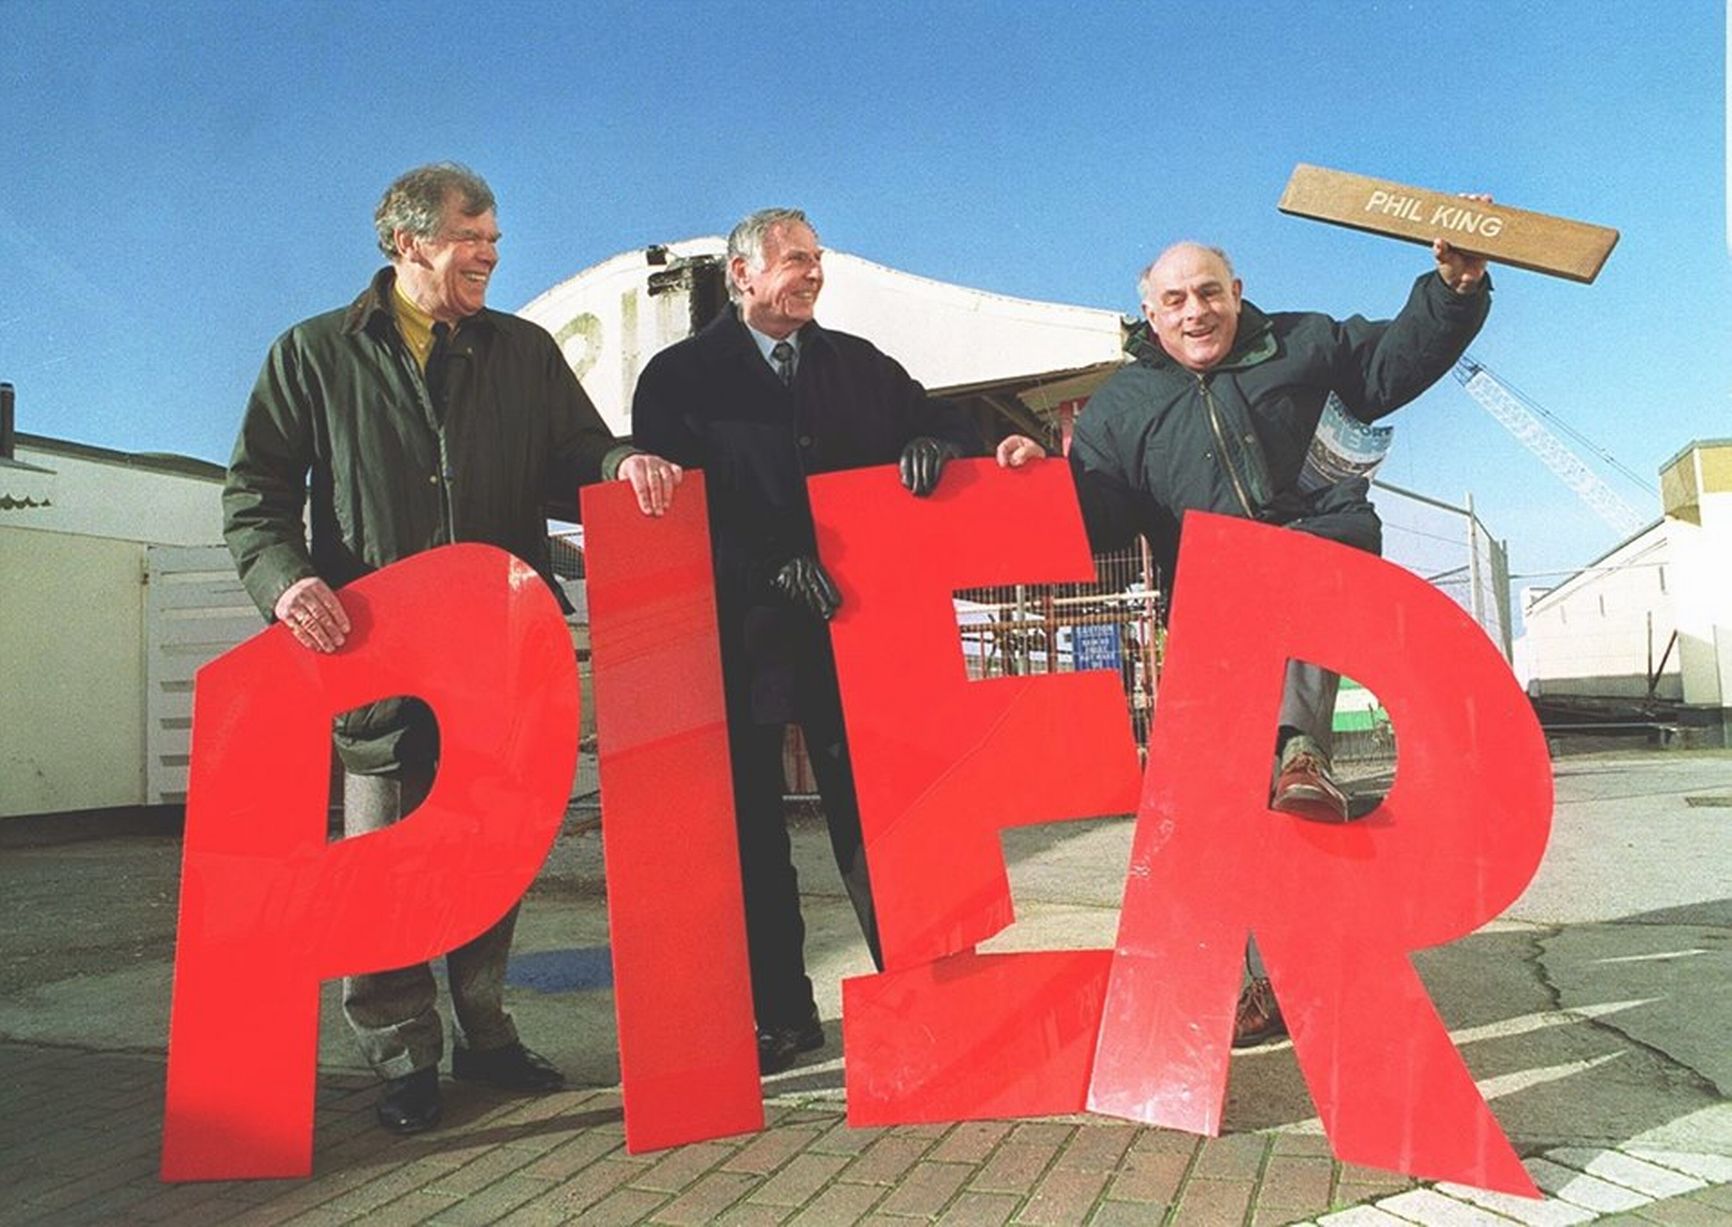 Ralph Gregson (centre) with Peter Lomas (left) and Phil King (right) on Southport Pier, as part of the campaign to save Southport Pier